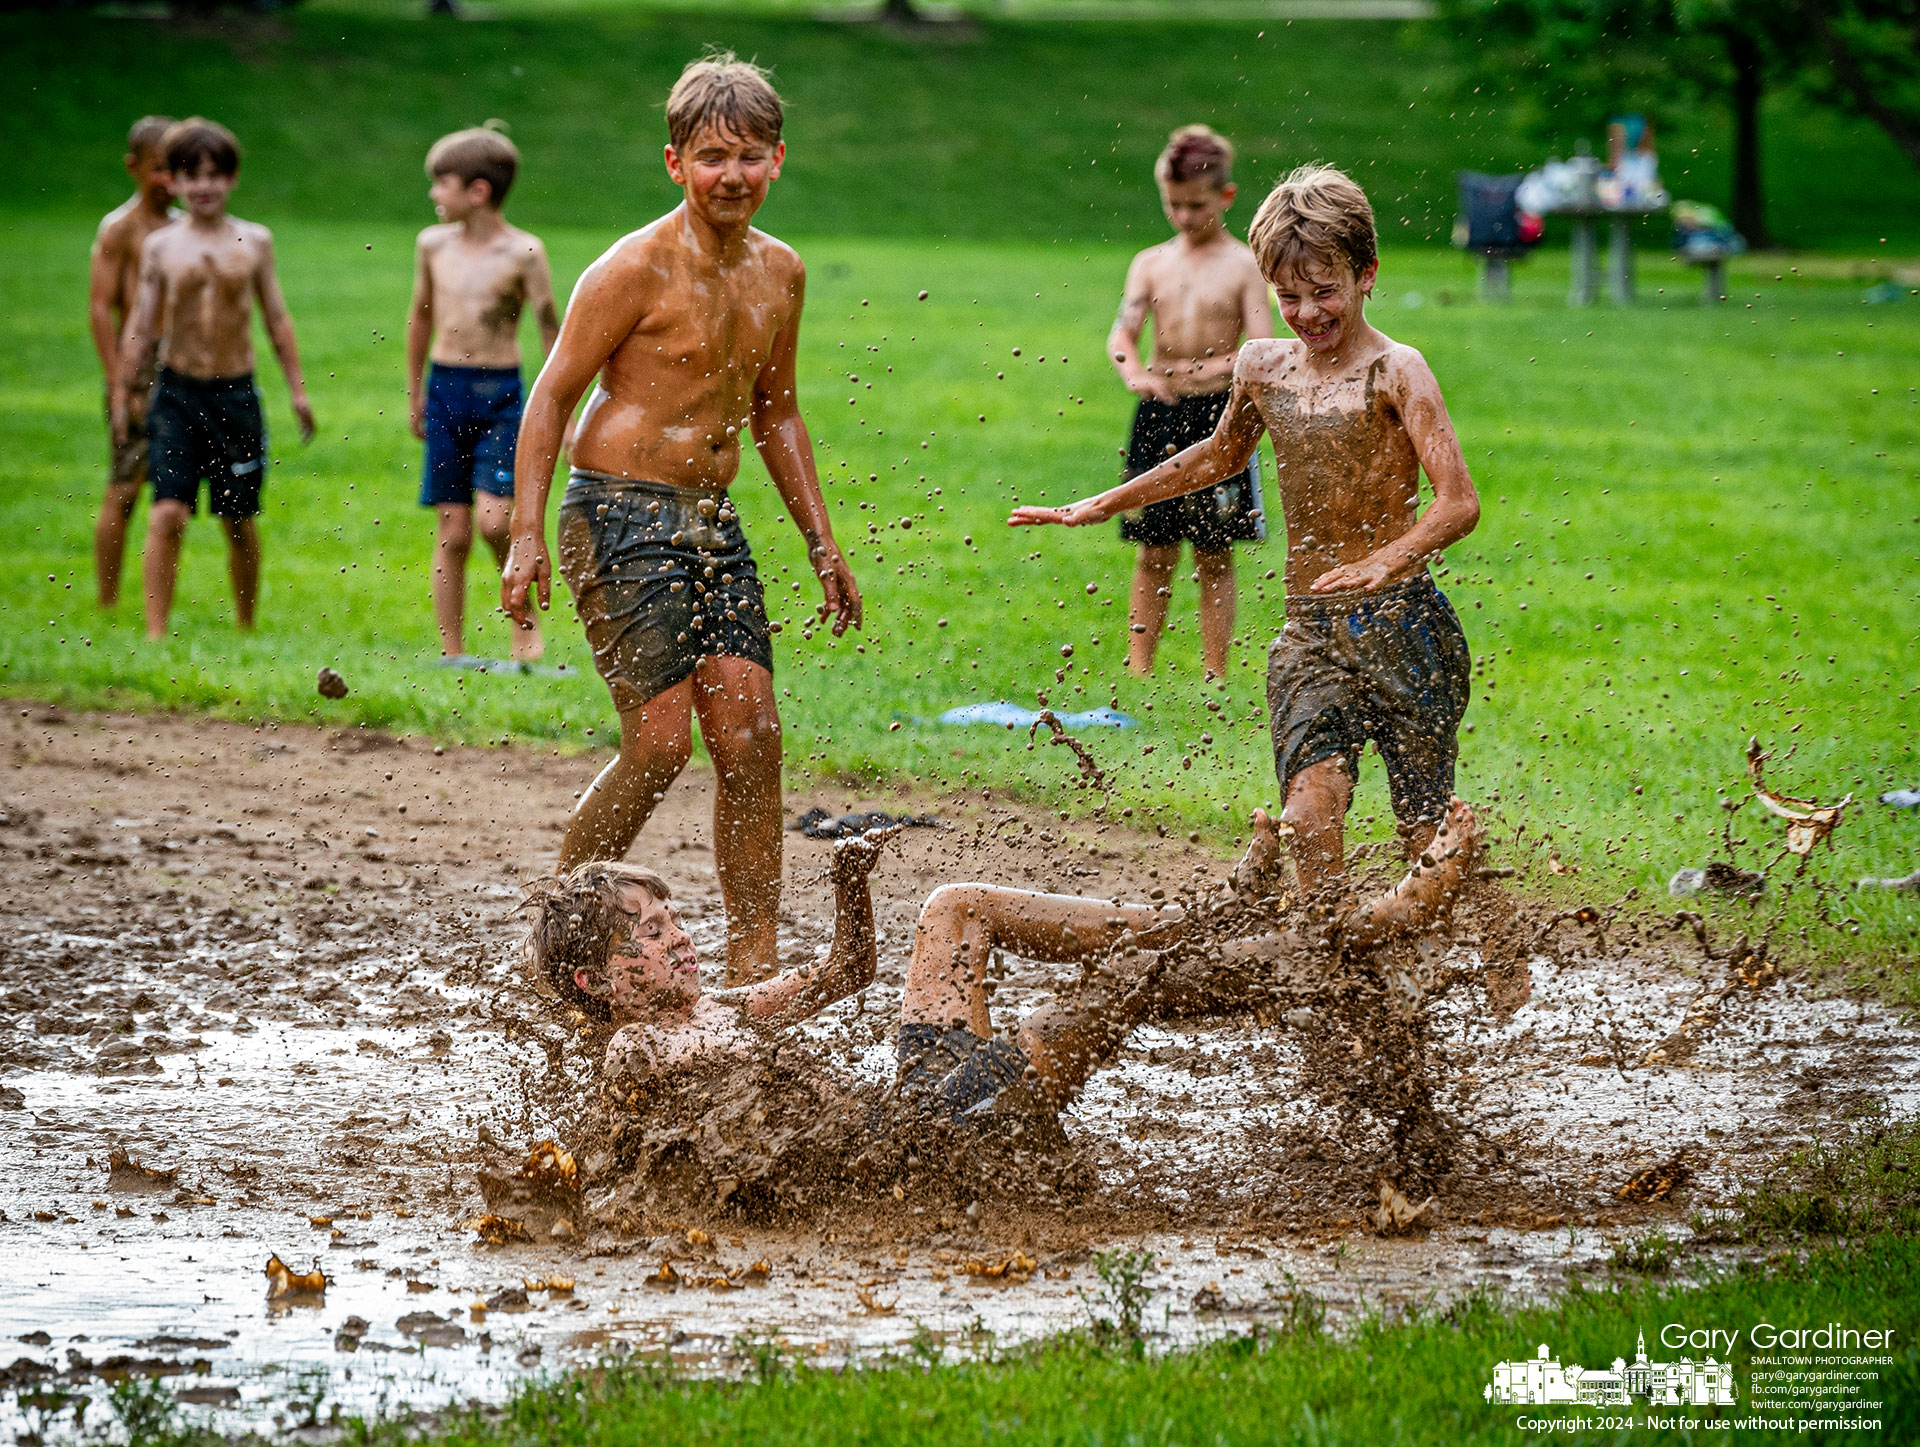 Boys take turns showing their best slides in the mud puddle between first and second bases on the Alum Creek Park North baseball field during a break from their friend's birthday party. My Final Photo for May 17, 2024.